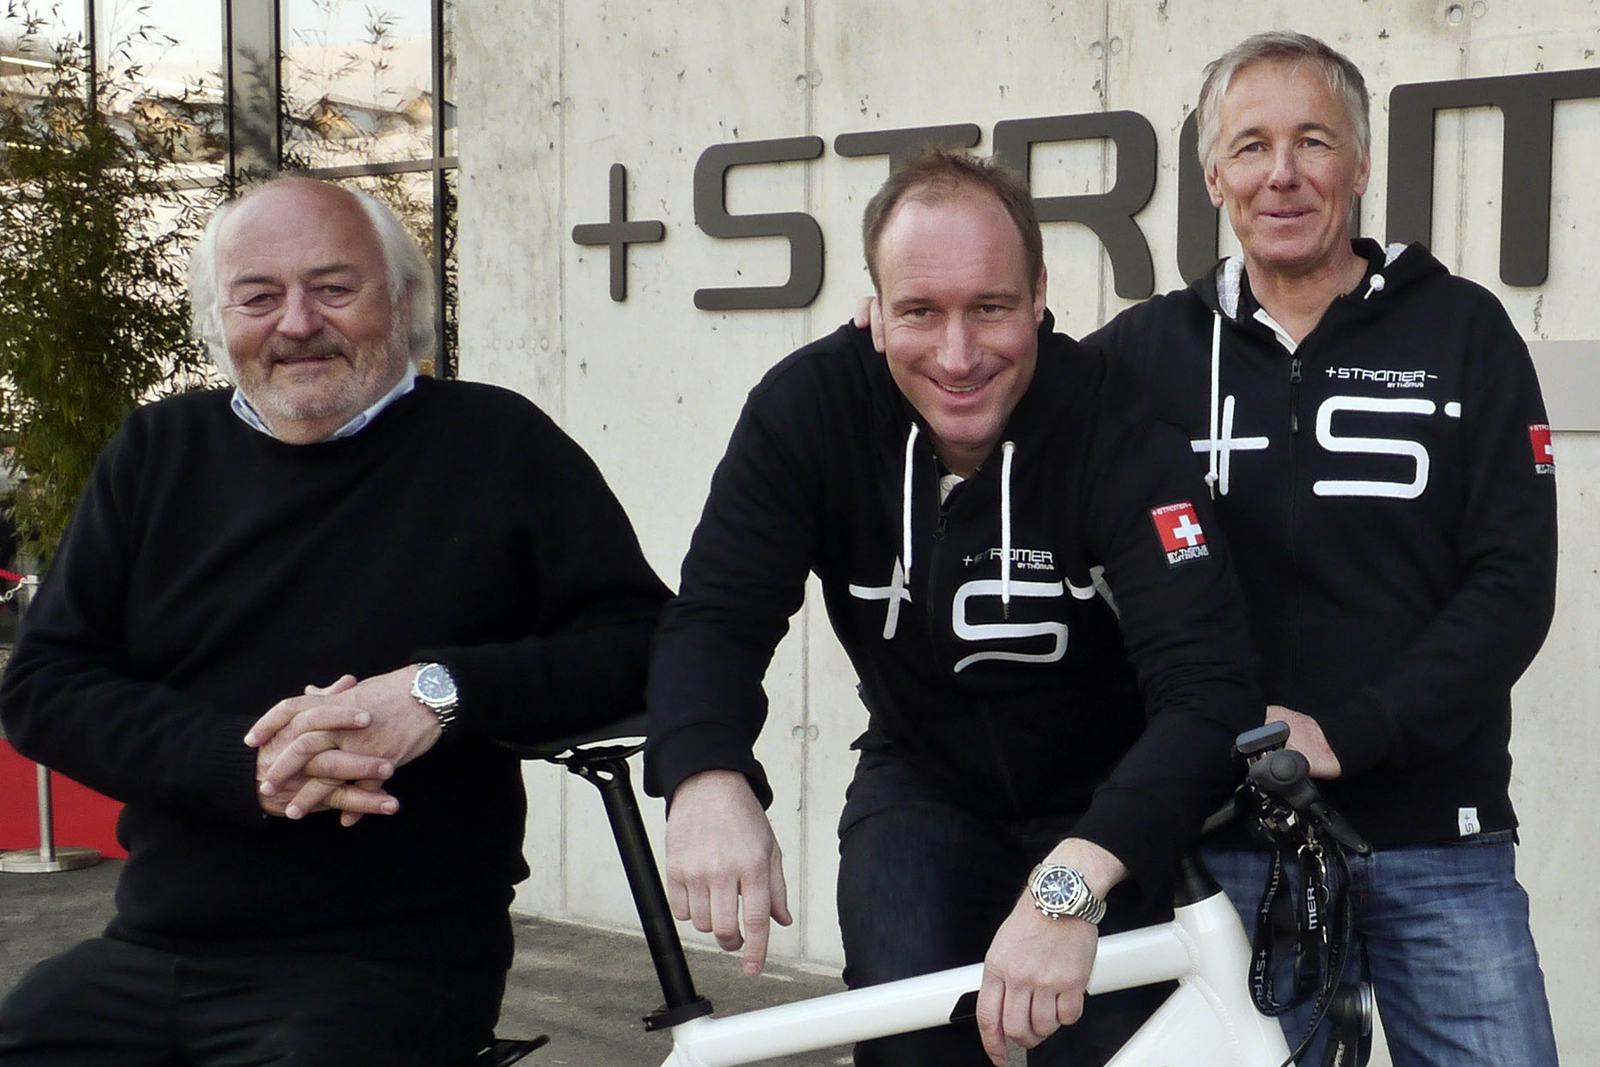 Two years ago, when everything still looked bright at the opening of the new Stromer HQ; CEO Christian Müller (right) with Chairman of the Board Thömu Binggeli (middle) and ‘Patron’ Andy Rihs (left). – Photo Peter Hummel